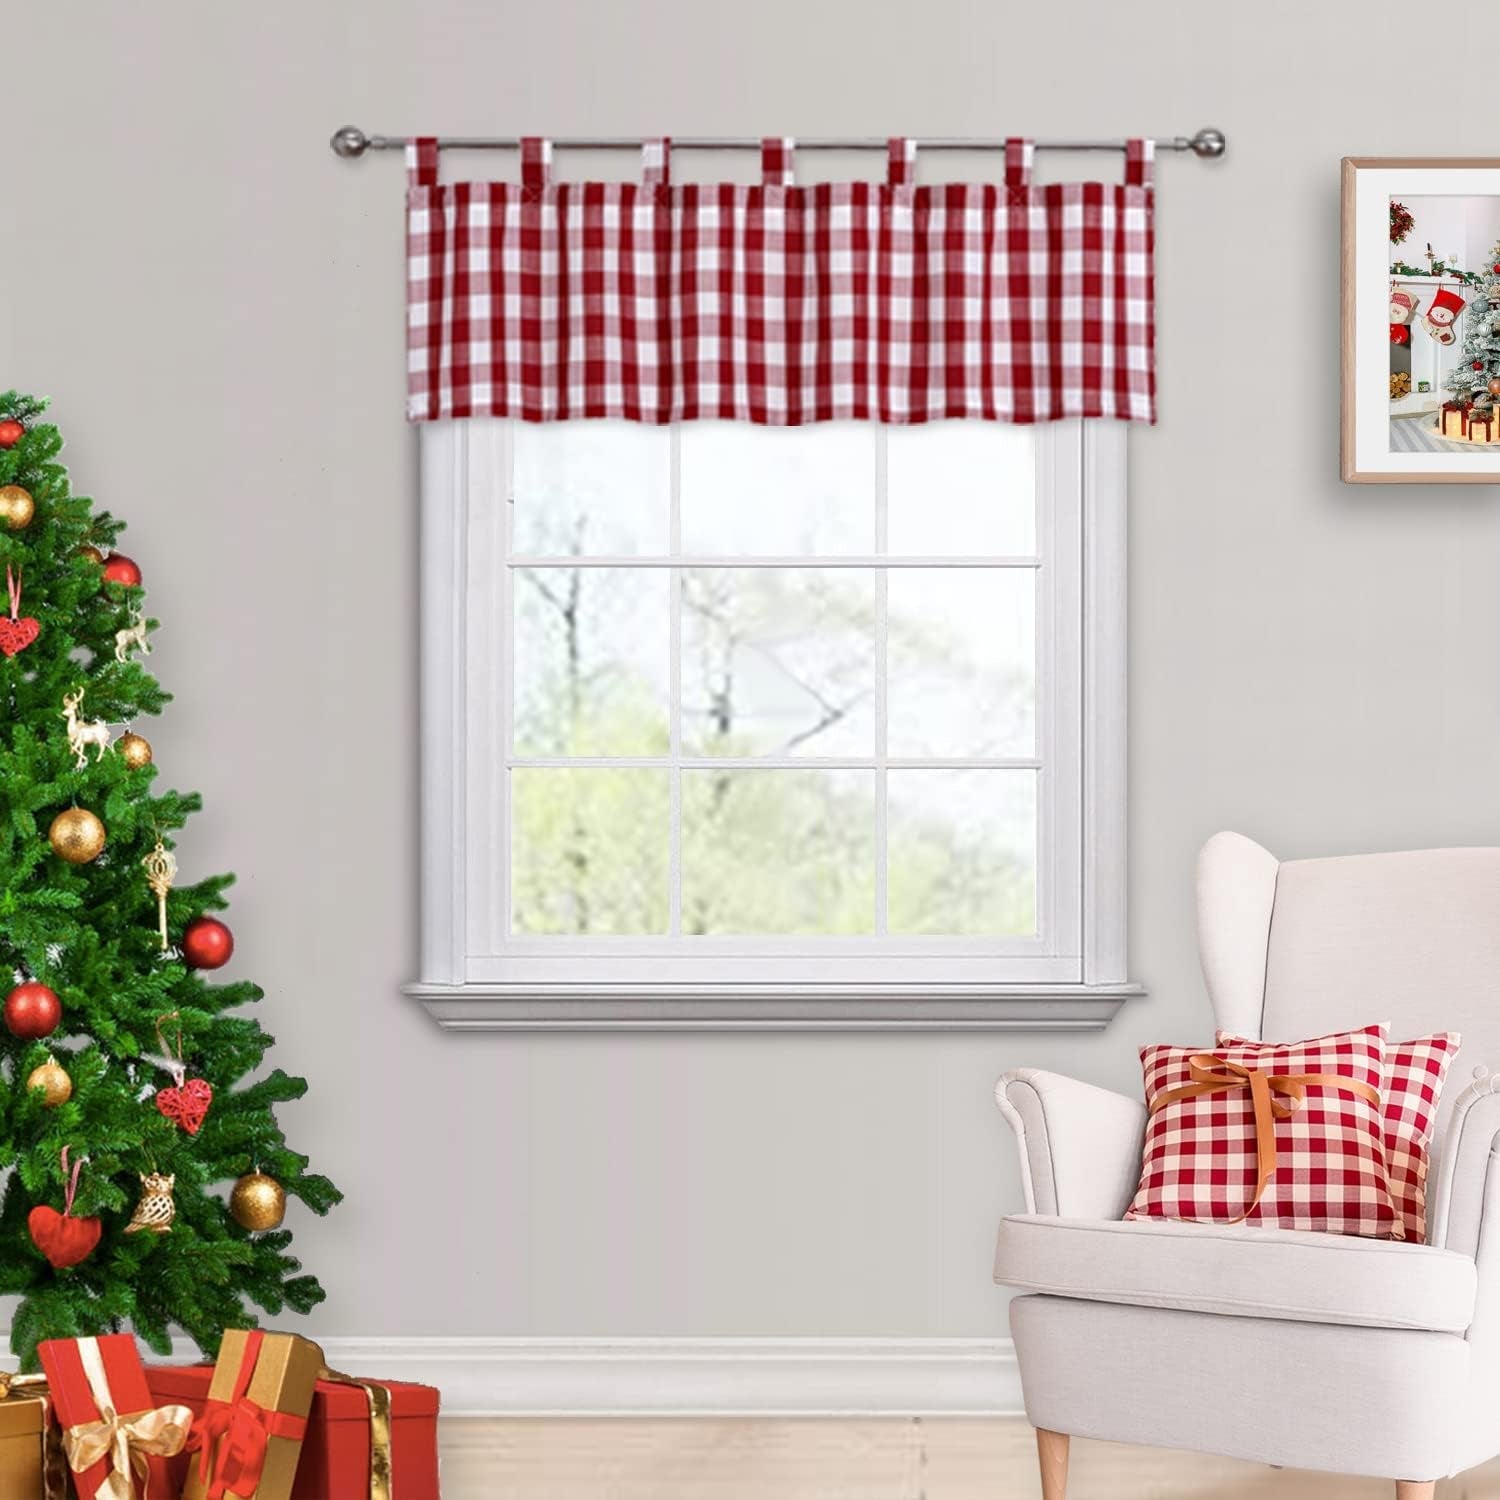 Buffalo Plaid Valance Farmhouse Kitchen Curtain Linen White Sheer Check Tab Top Rustic Window Treatment for Living Room Kitchen,1 Panel,56''X16'',Black and White